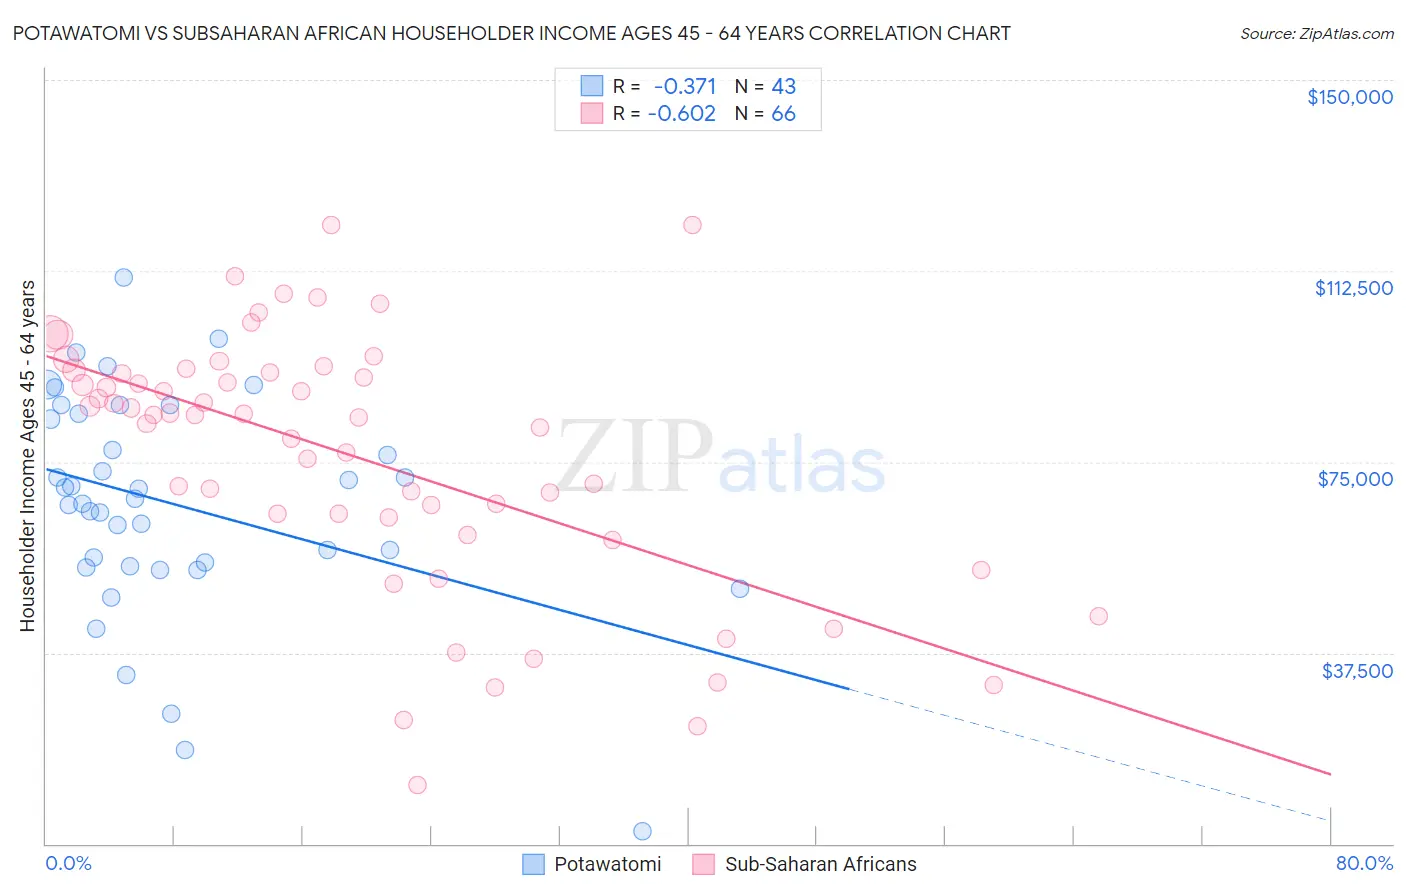 Potawatomi vs Subsaharan African Householder Income Ages 45 - 64 years